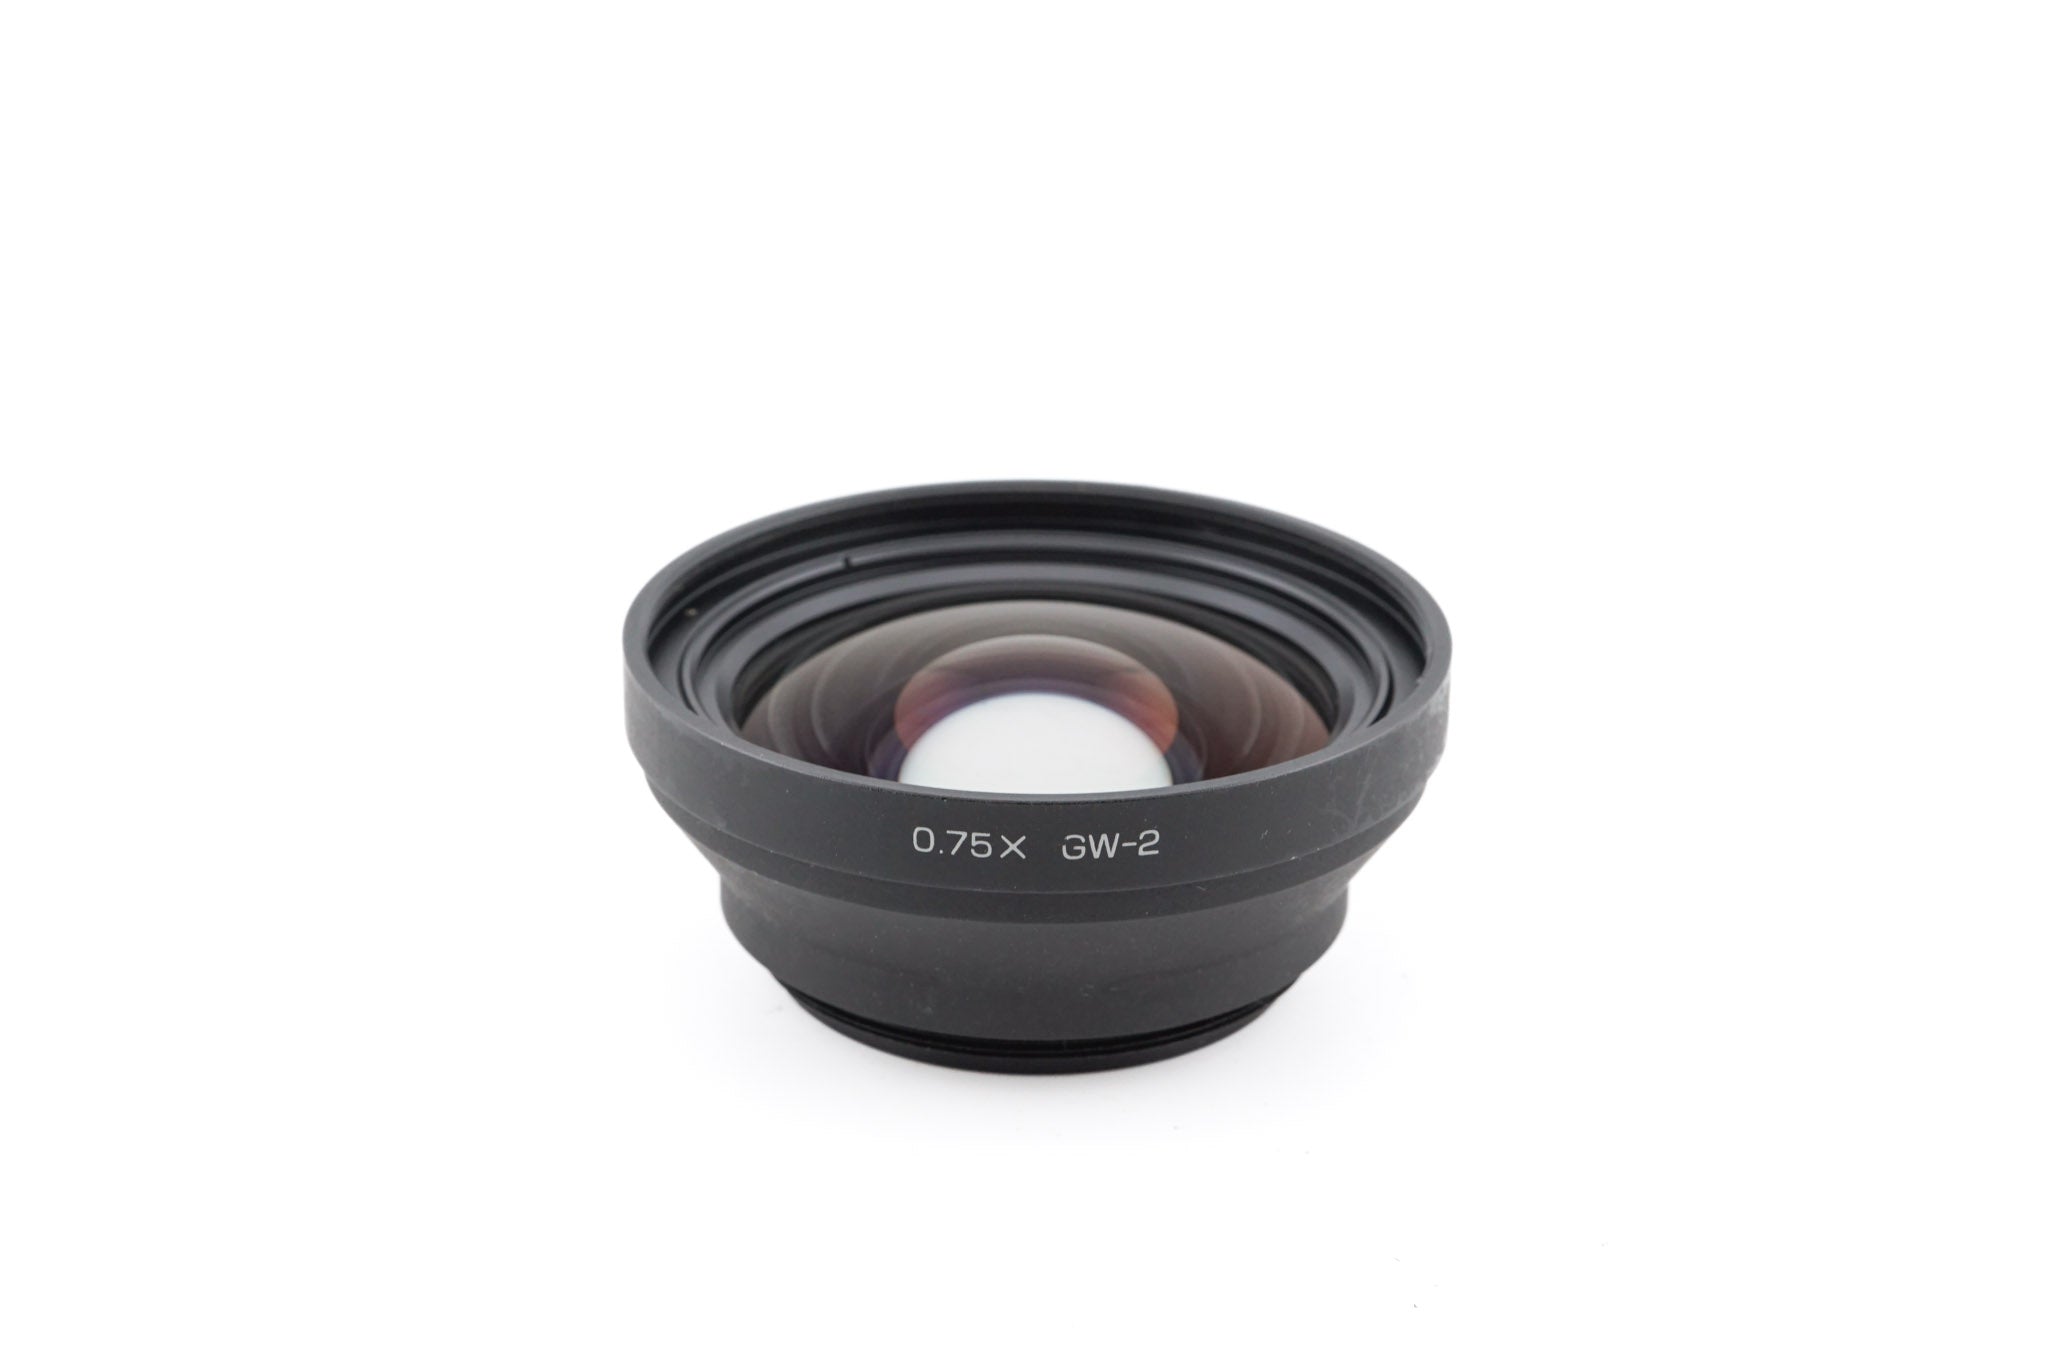 Ricoh 0.75x GW-2 Wide-Angle Conversion Lens + GH-2 43mm Adapter Ring